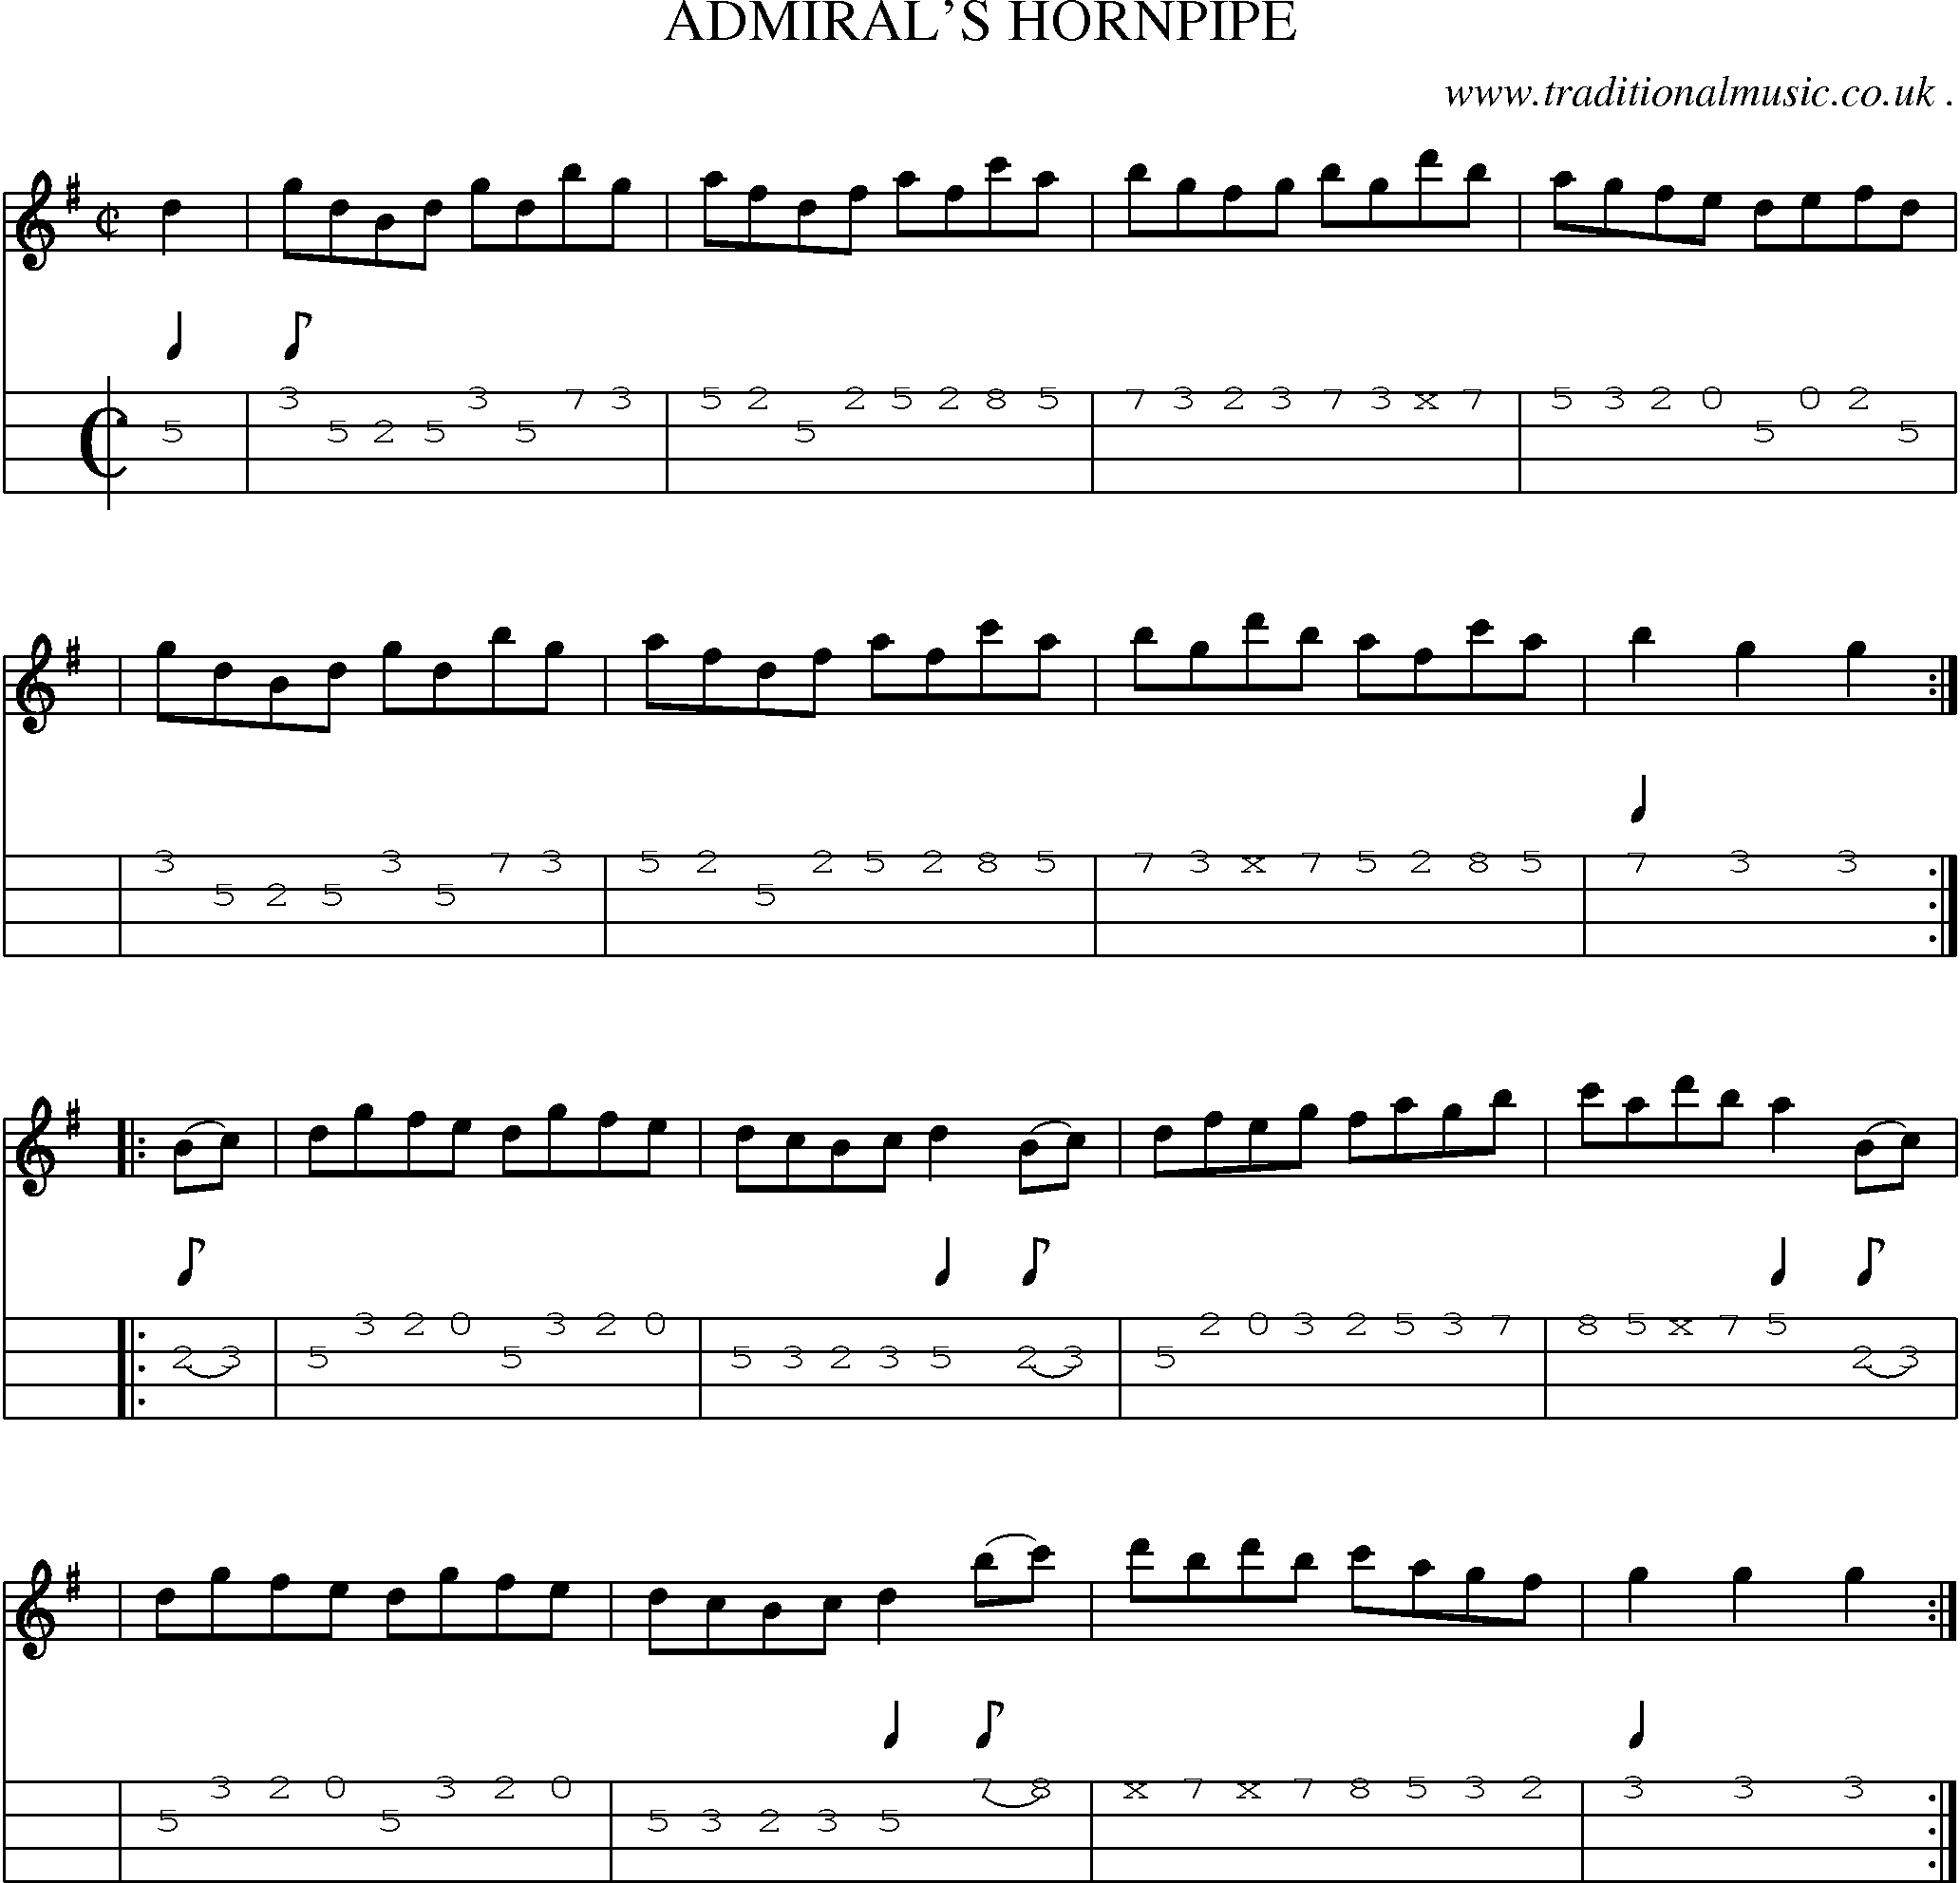 Sheet-Music and Mandolin Tabs for Admirals Hornpipe